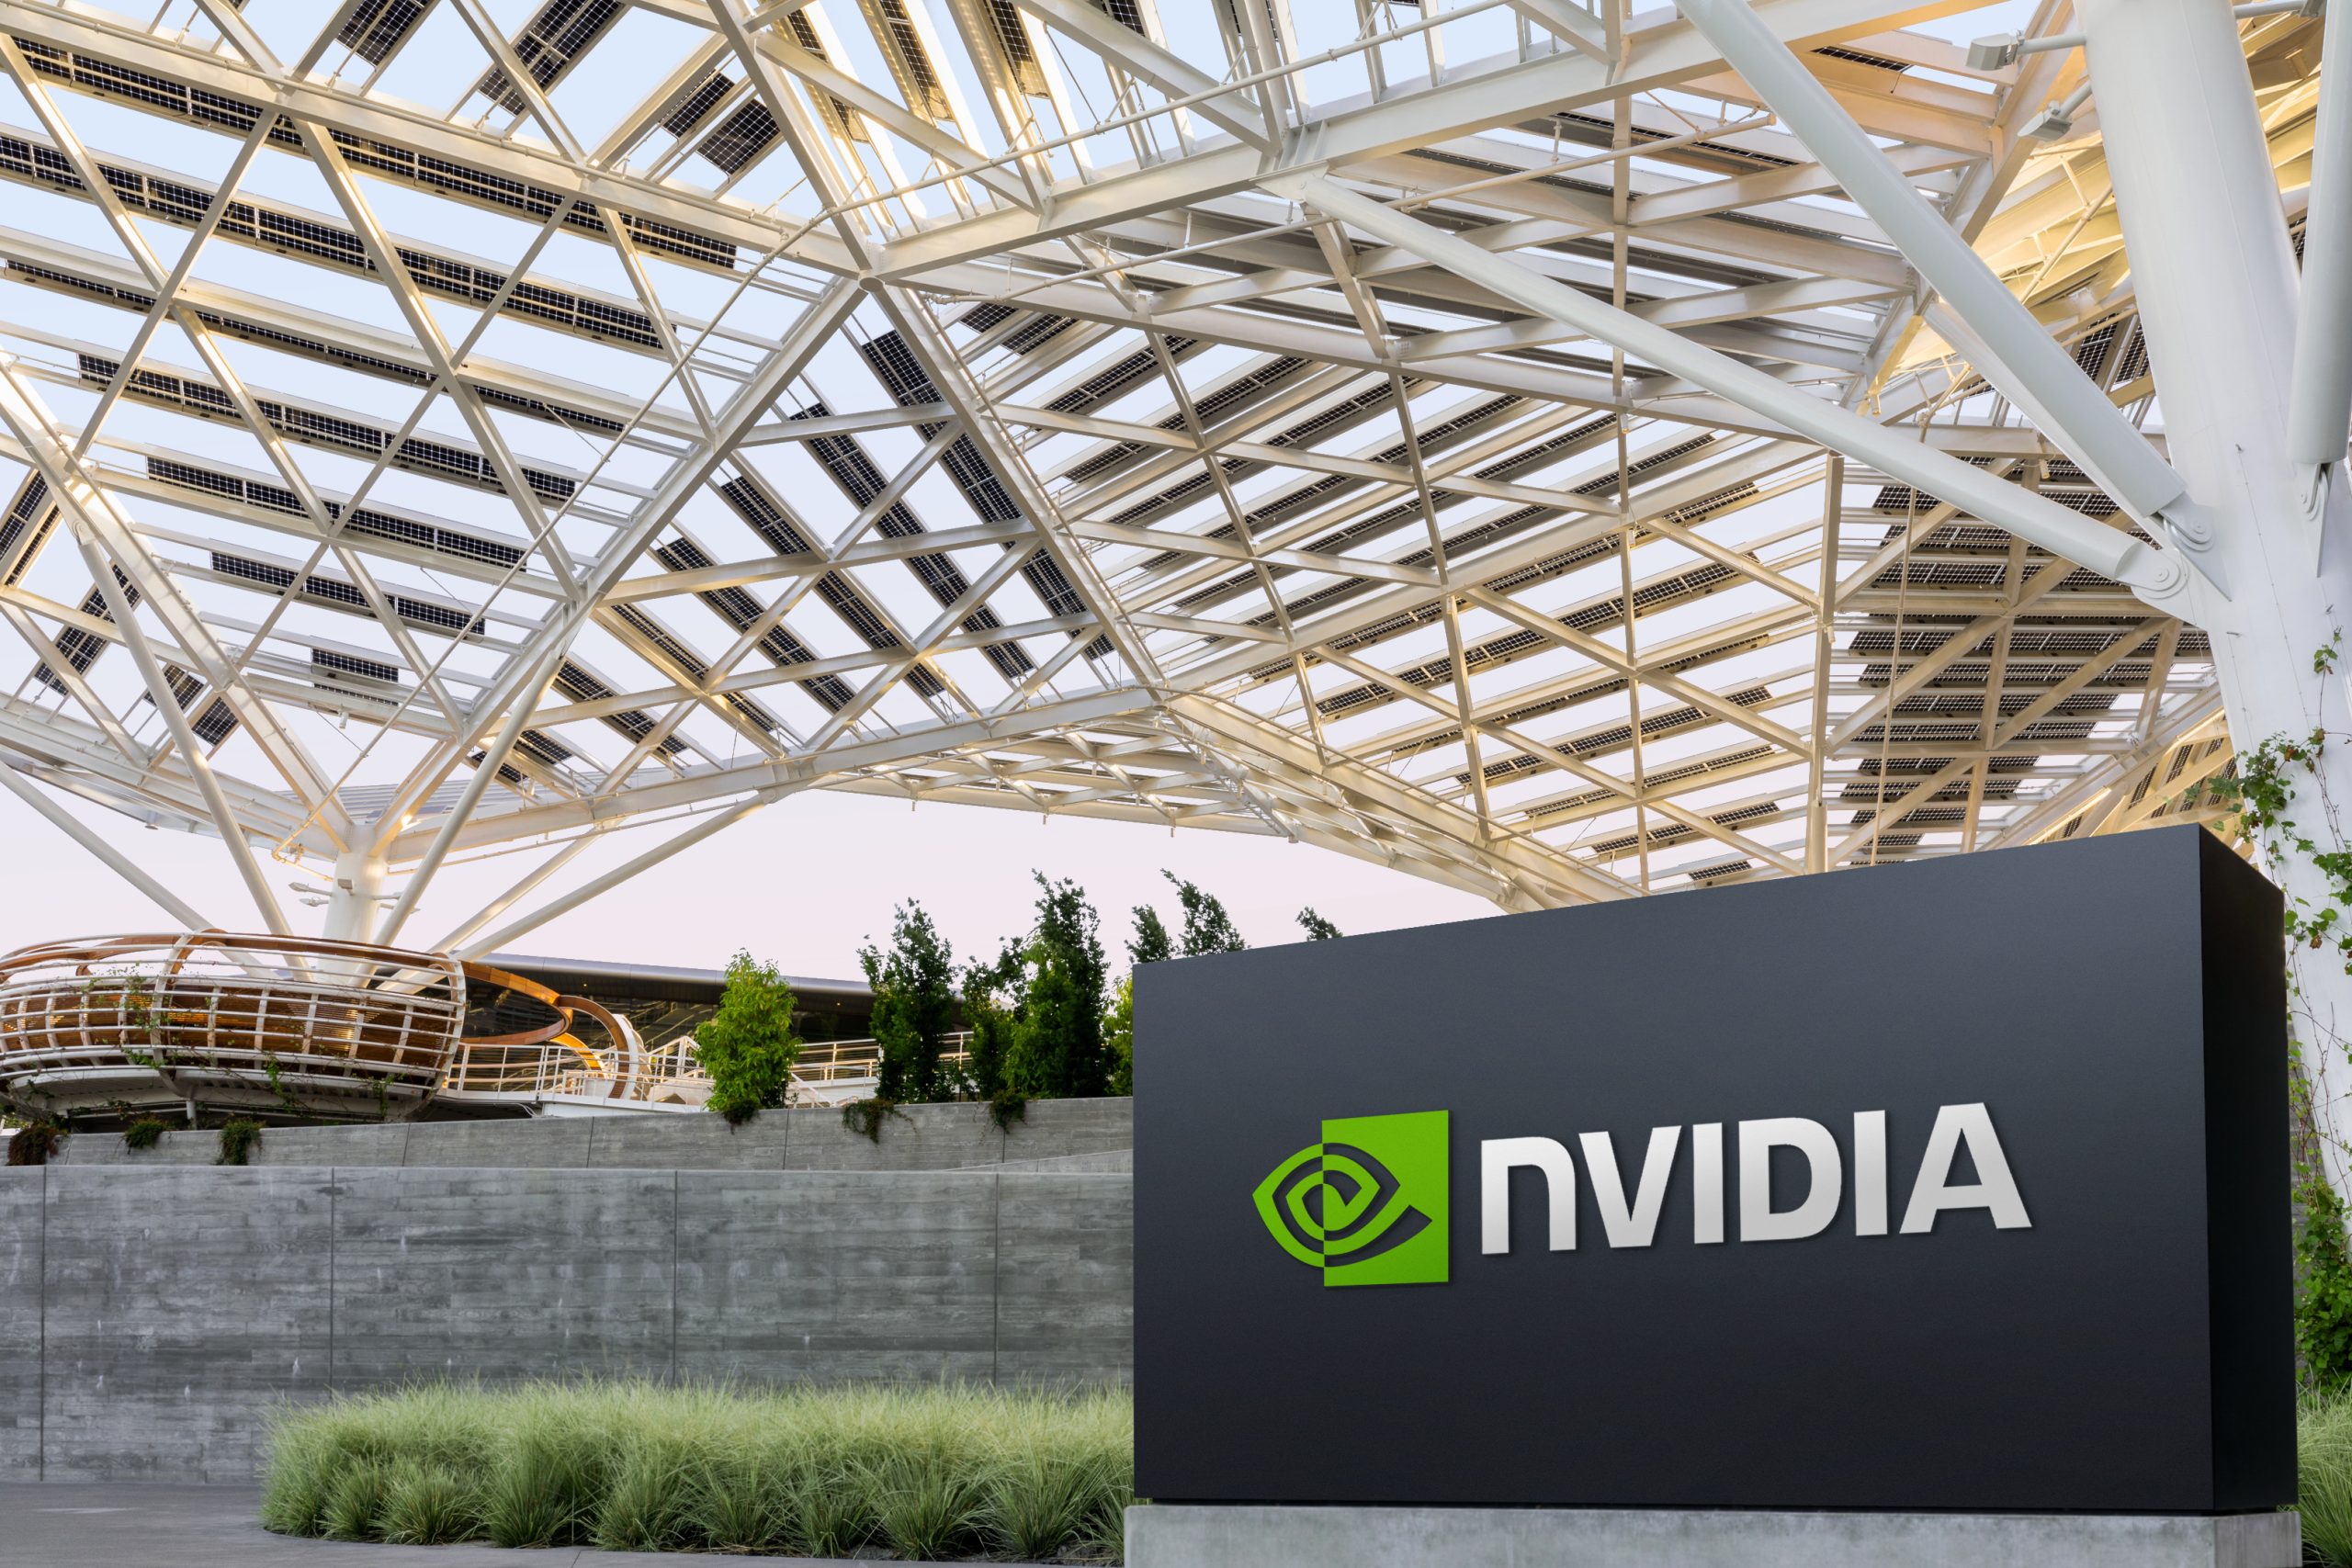 Apparently, a drop in the stock price of one of Nvidia's vendors has caused its stock to fall. Currently, Nvidia's market value is 1.9 trillion dollars.